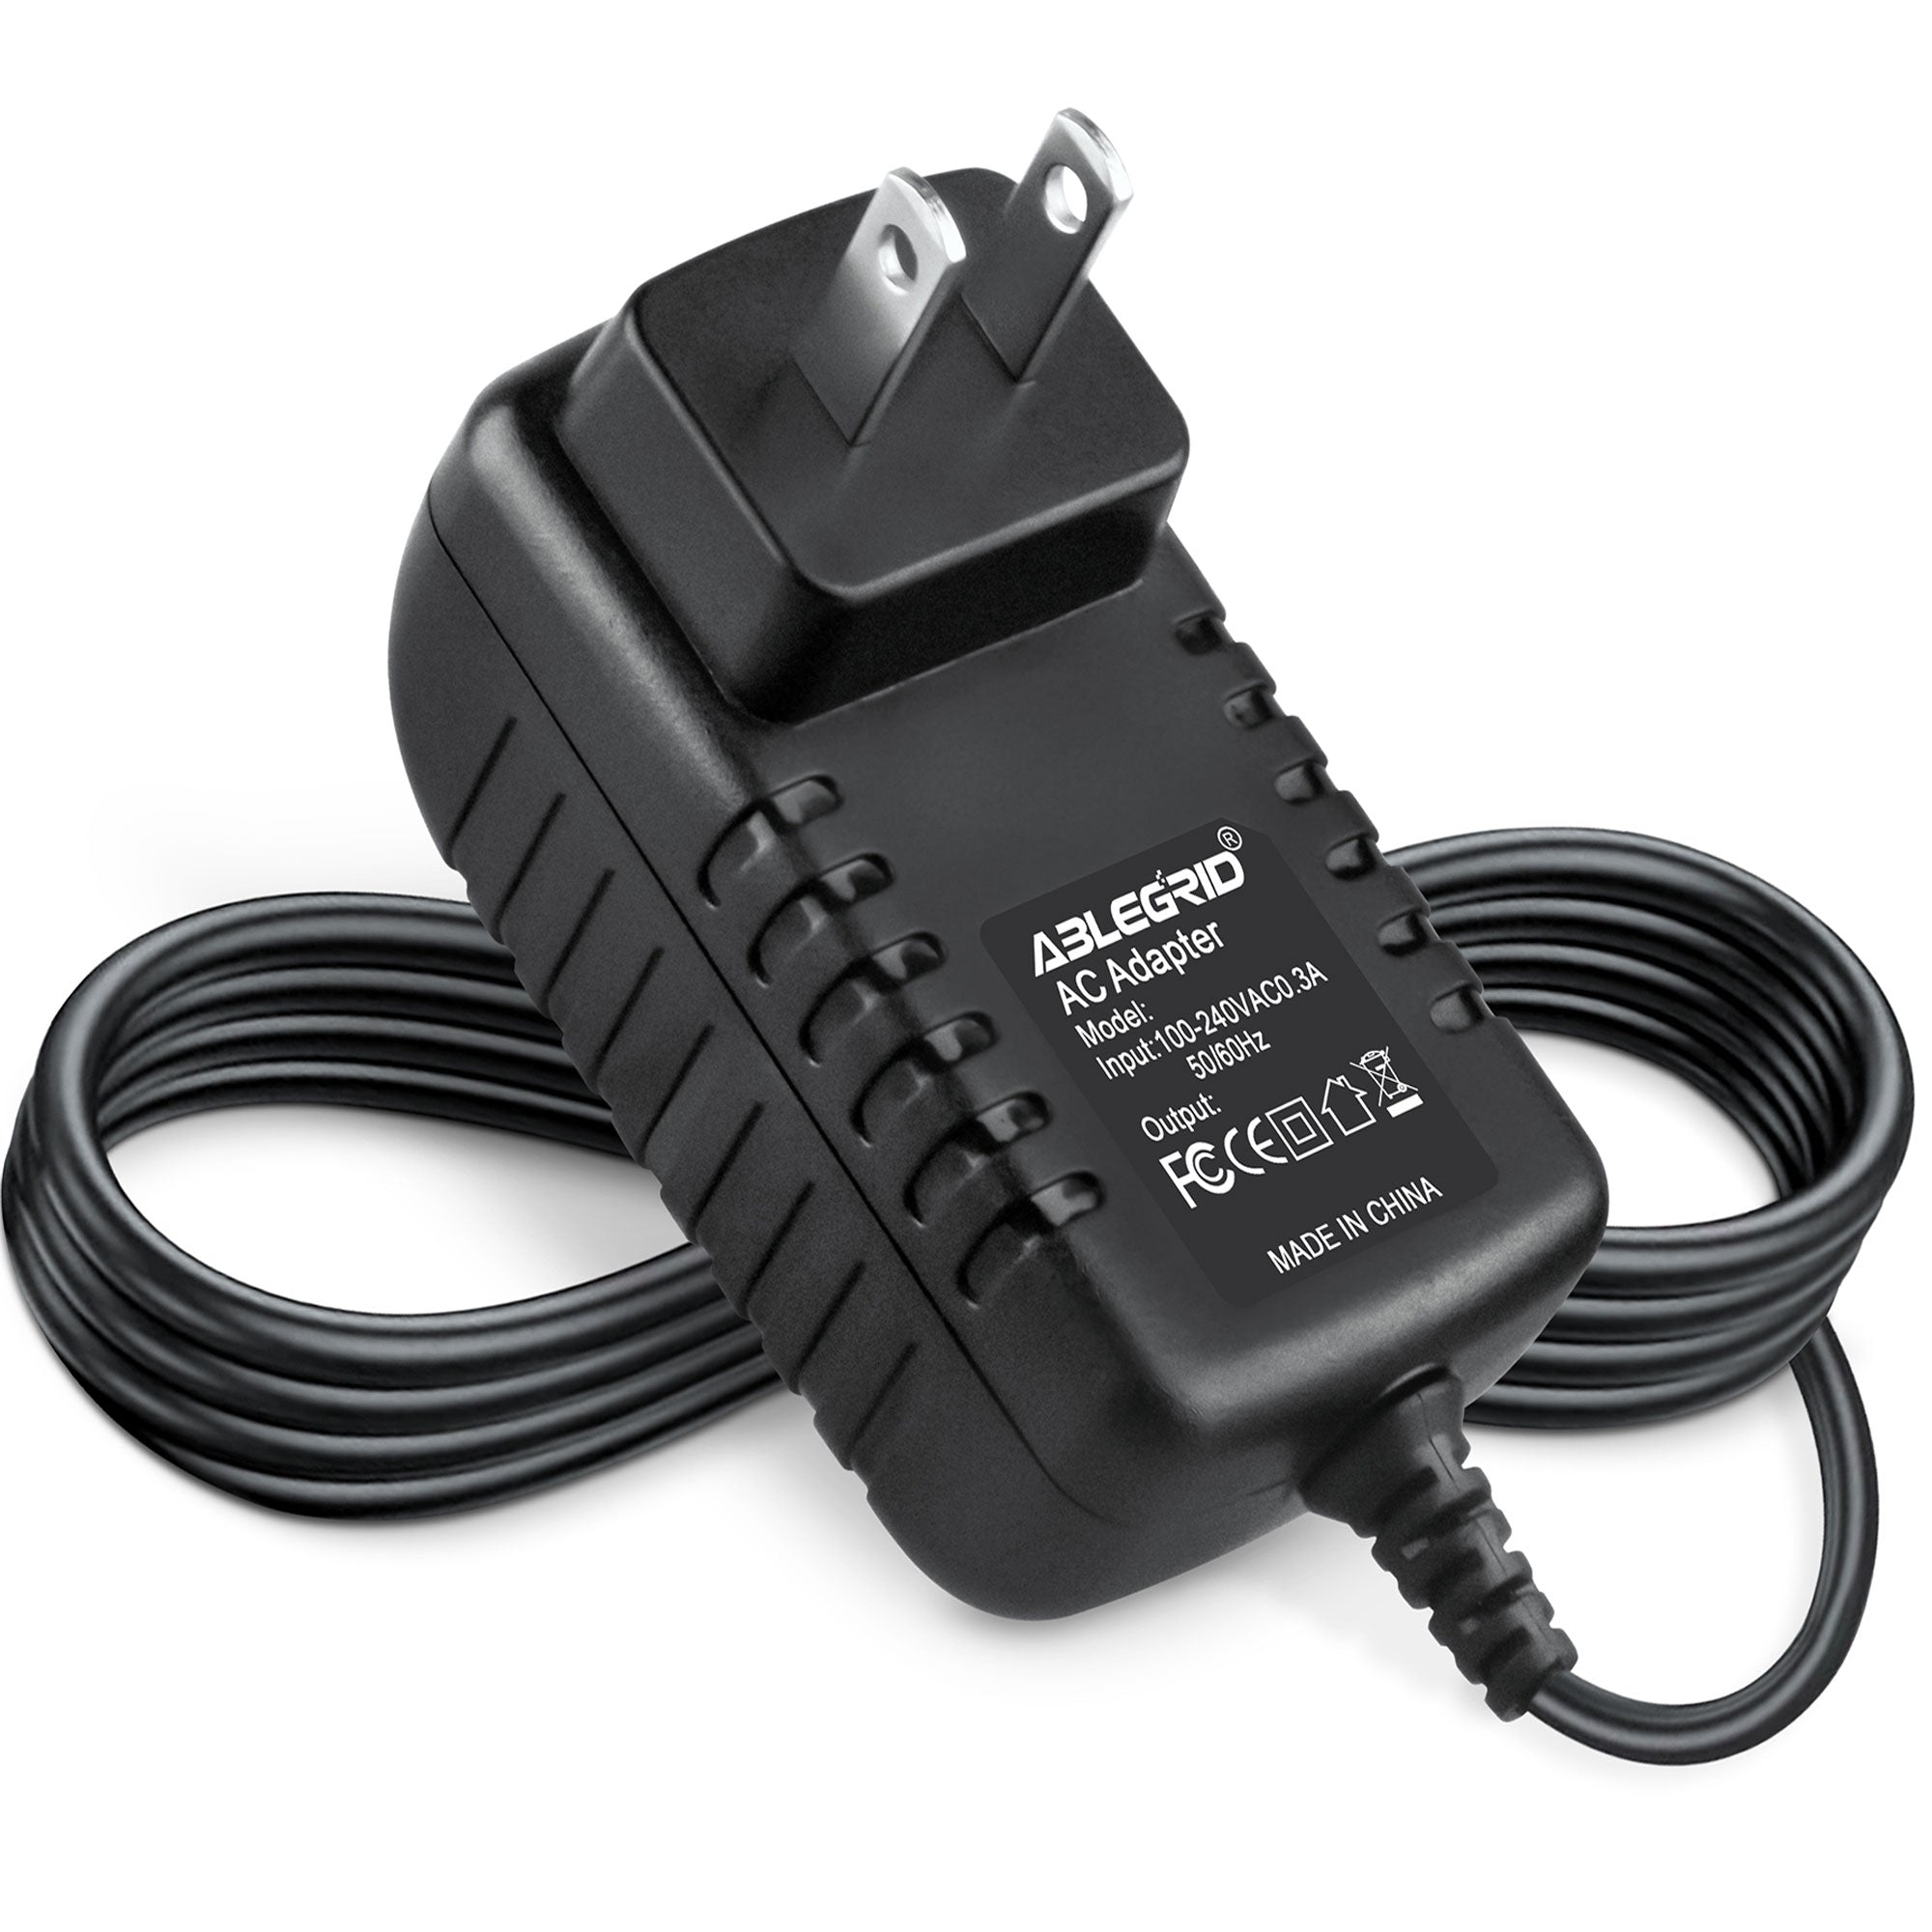 AbleGrid AC-DC Adapter for Ryobi Model: 4400100 Class 2 Transformer Power Supply Cord Cable Charger Input: 100 - 240 VAC 50/60Hz Worldwide Voltage Use PSU